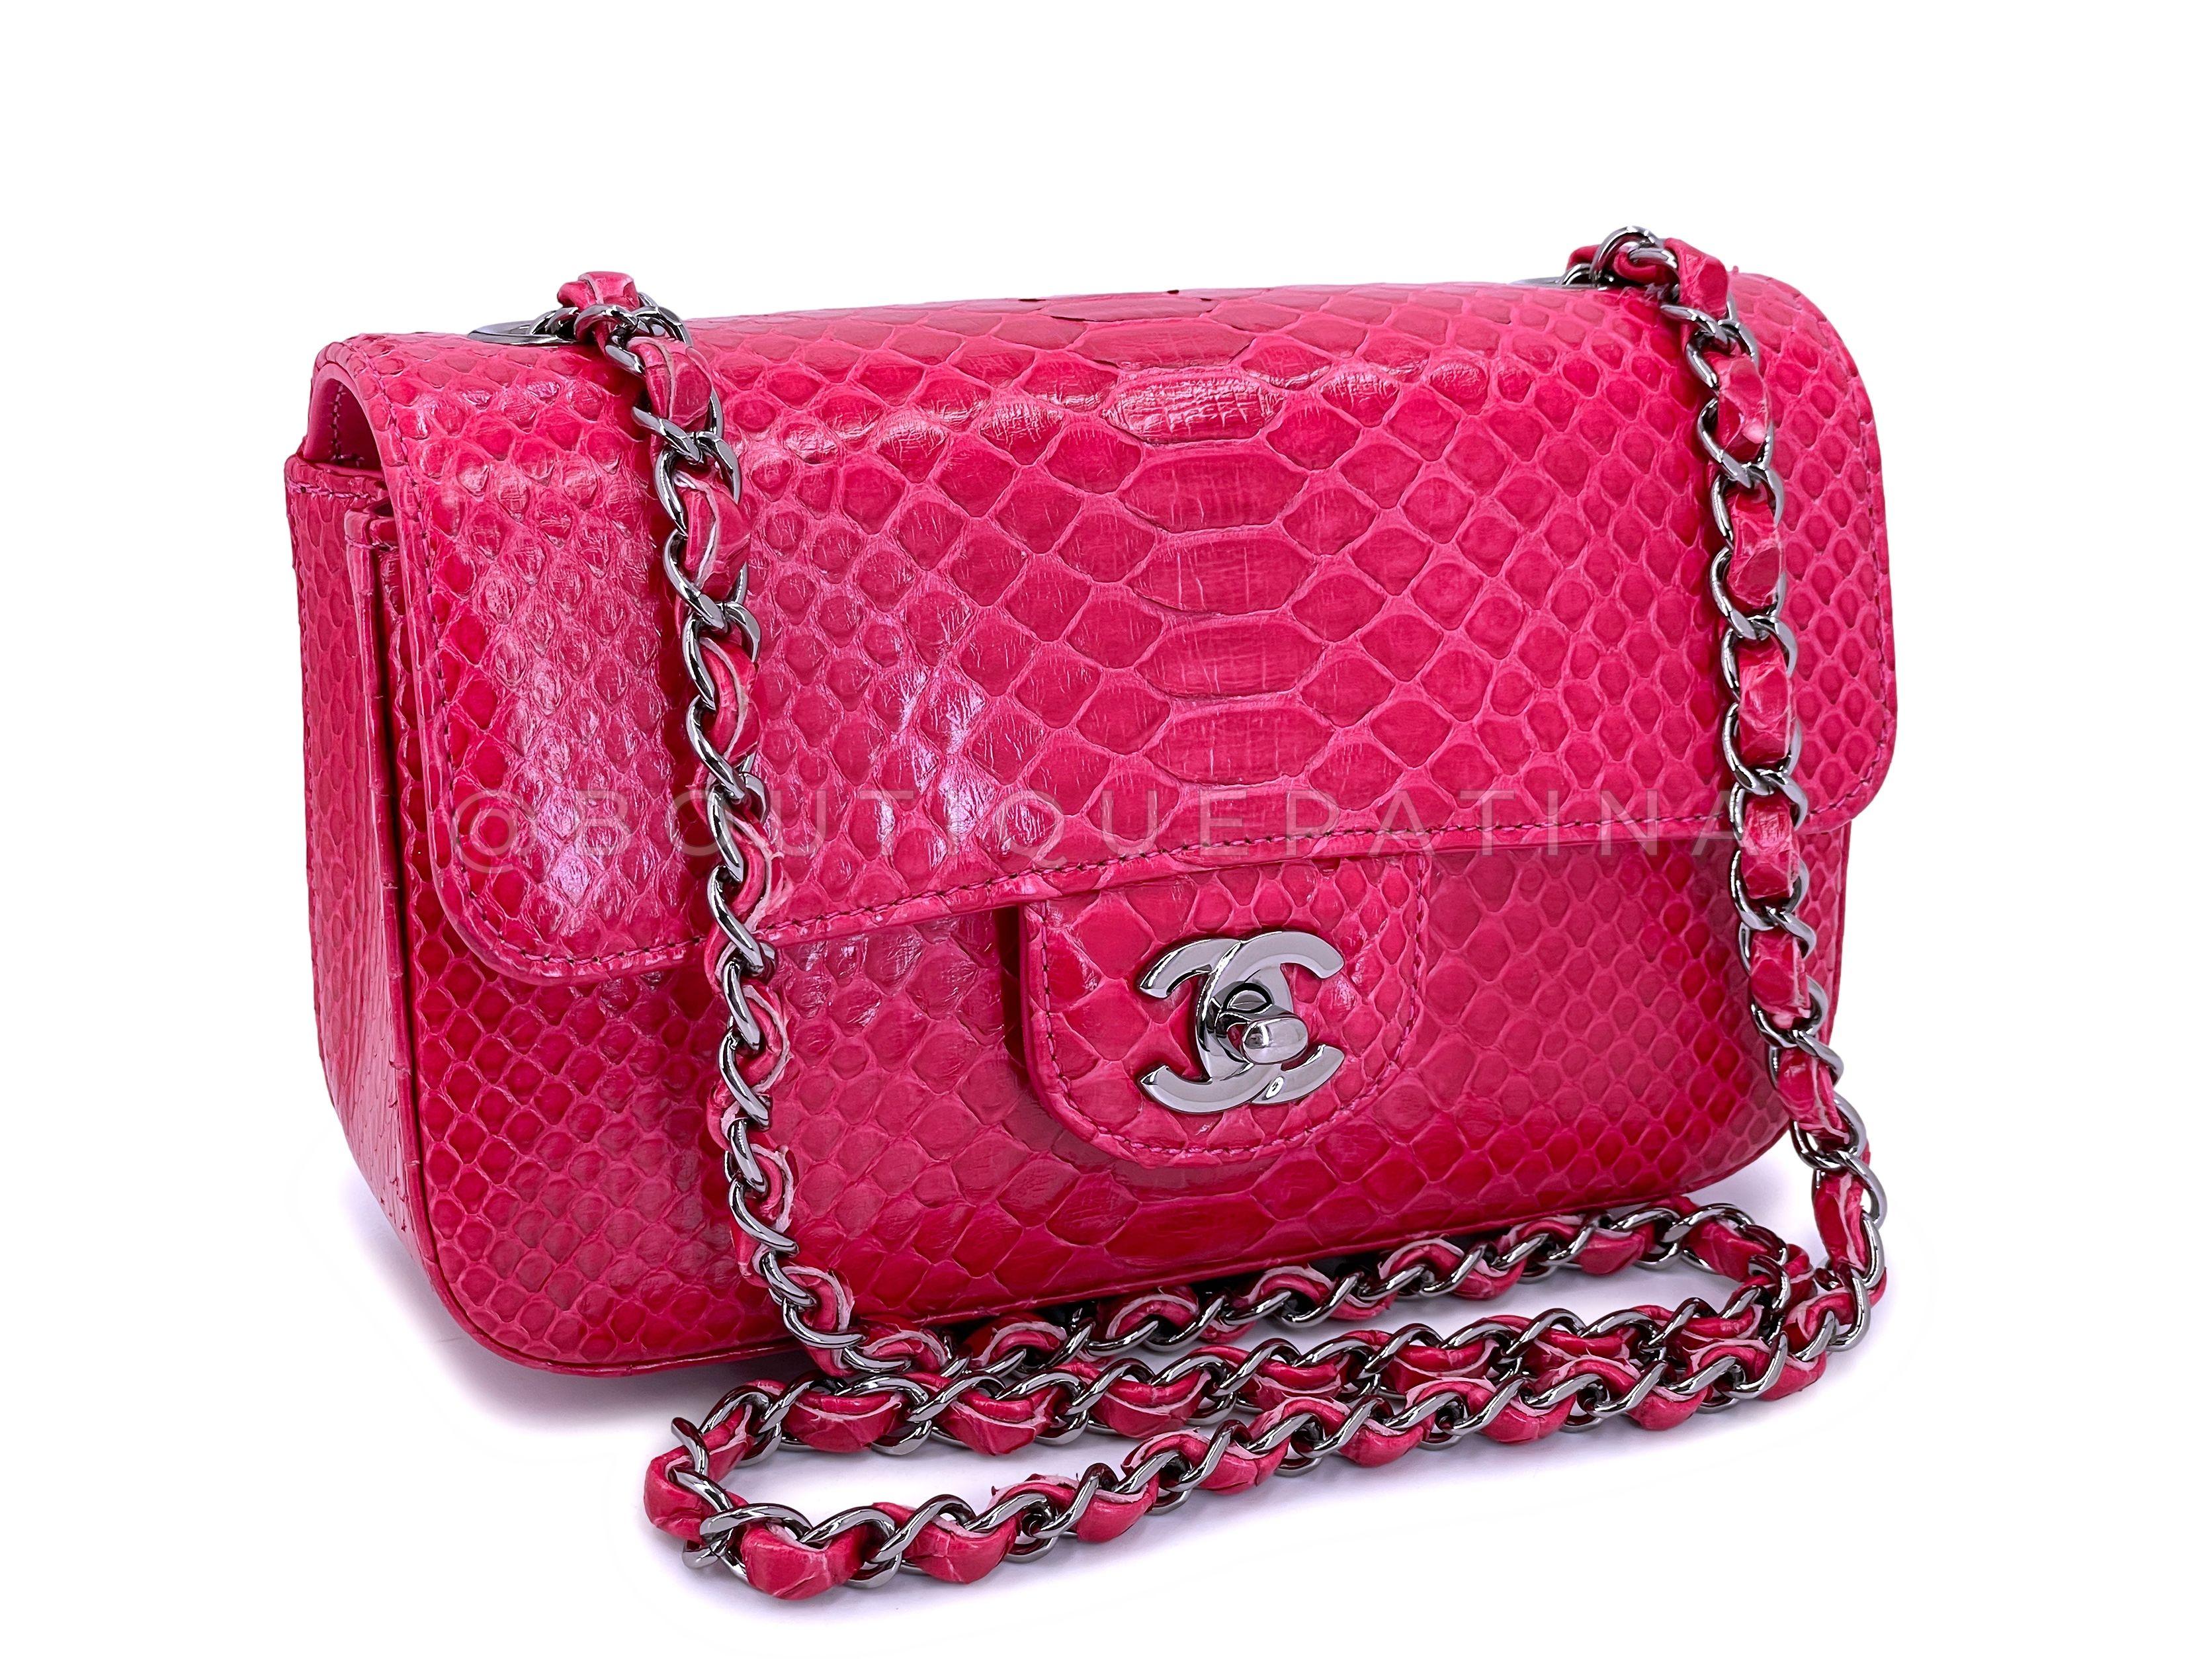 Chanel Pink Embroidered Lambskin Square Mini Flap Bag